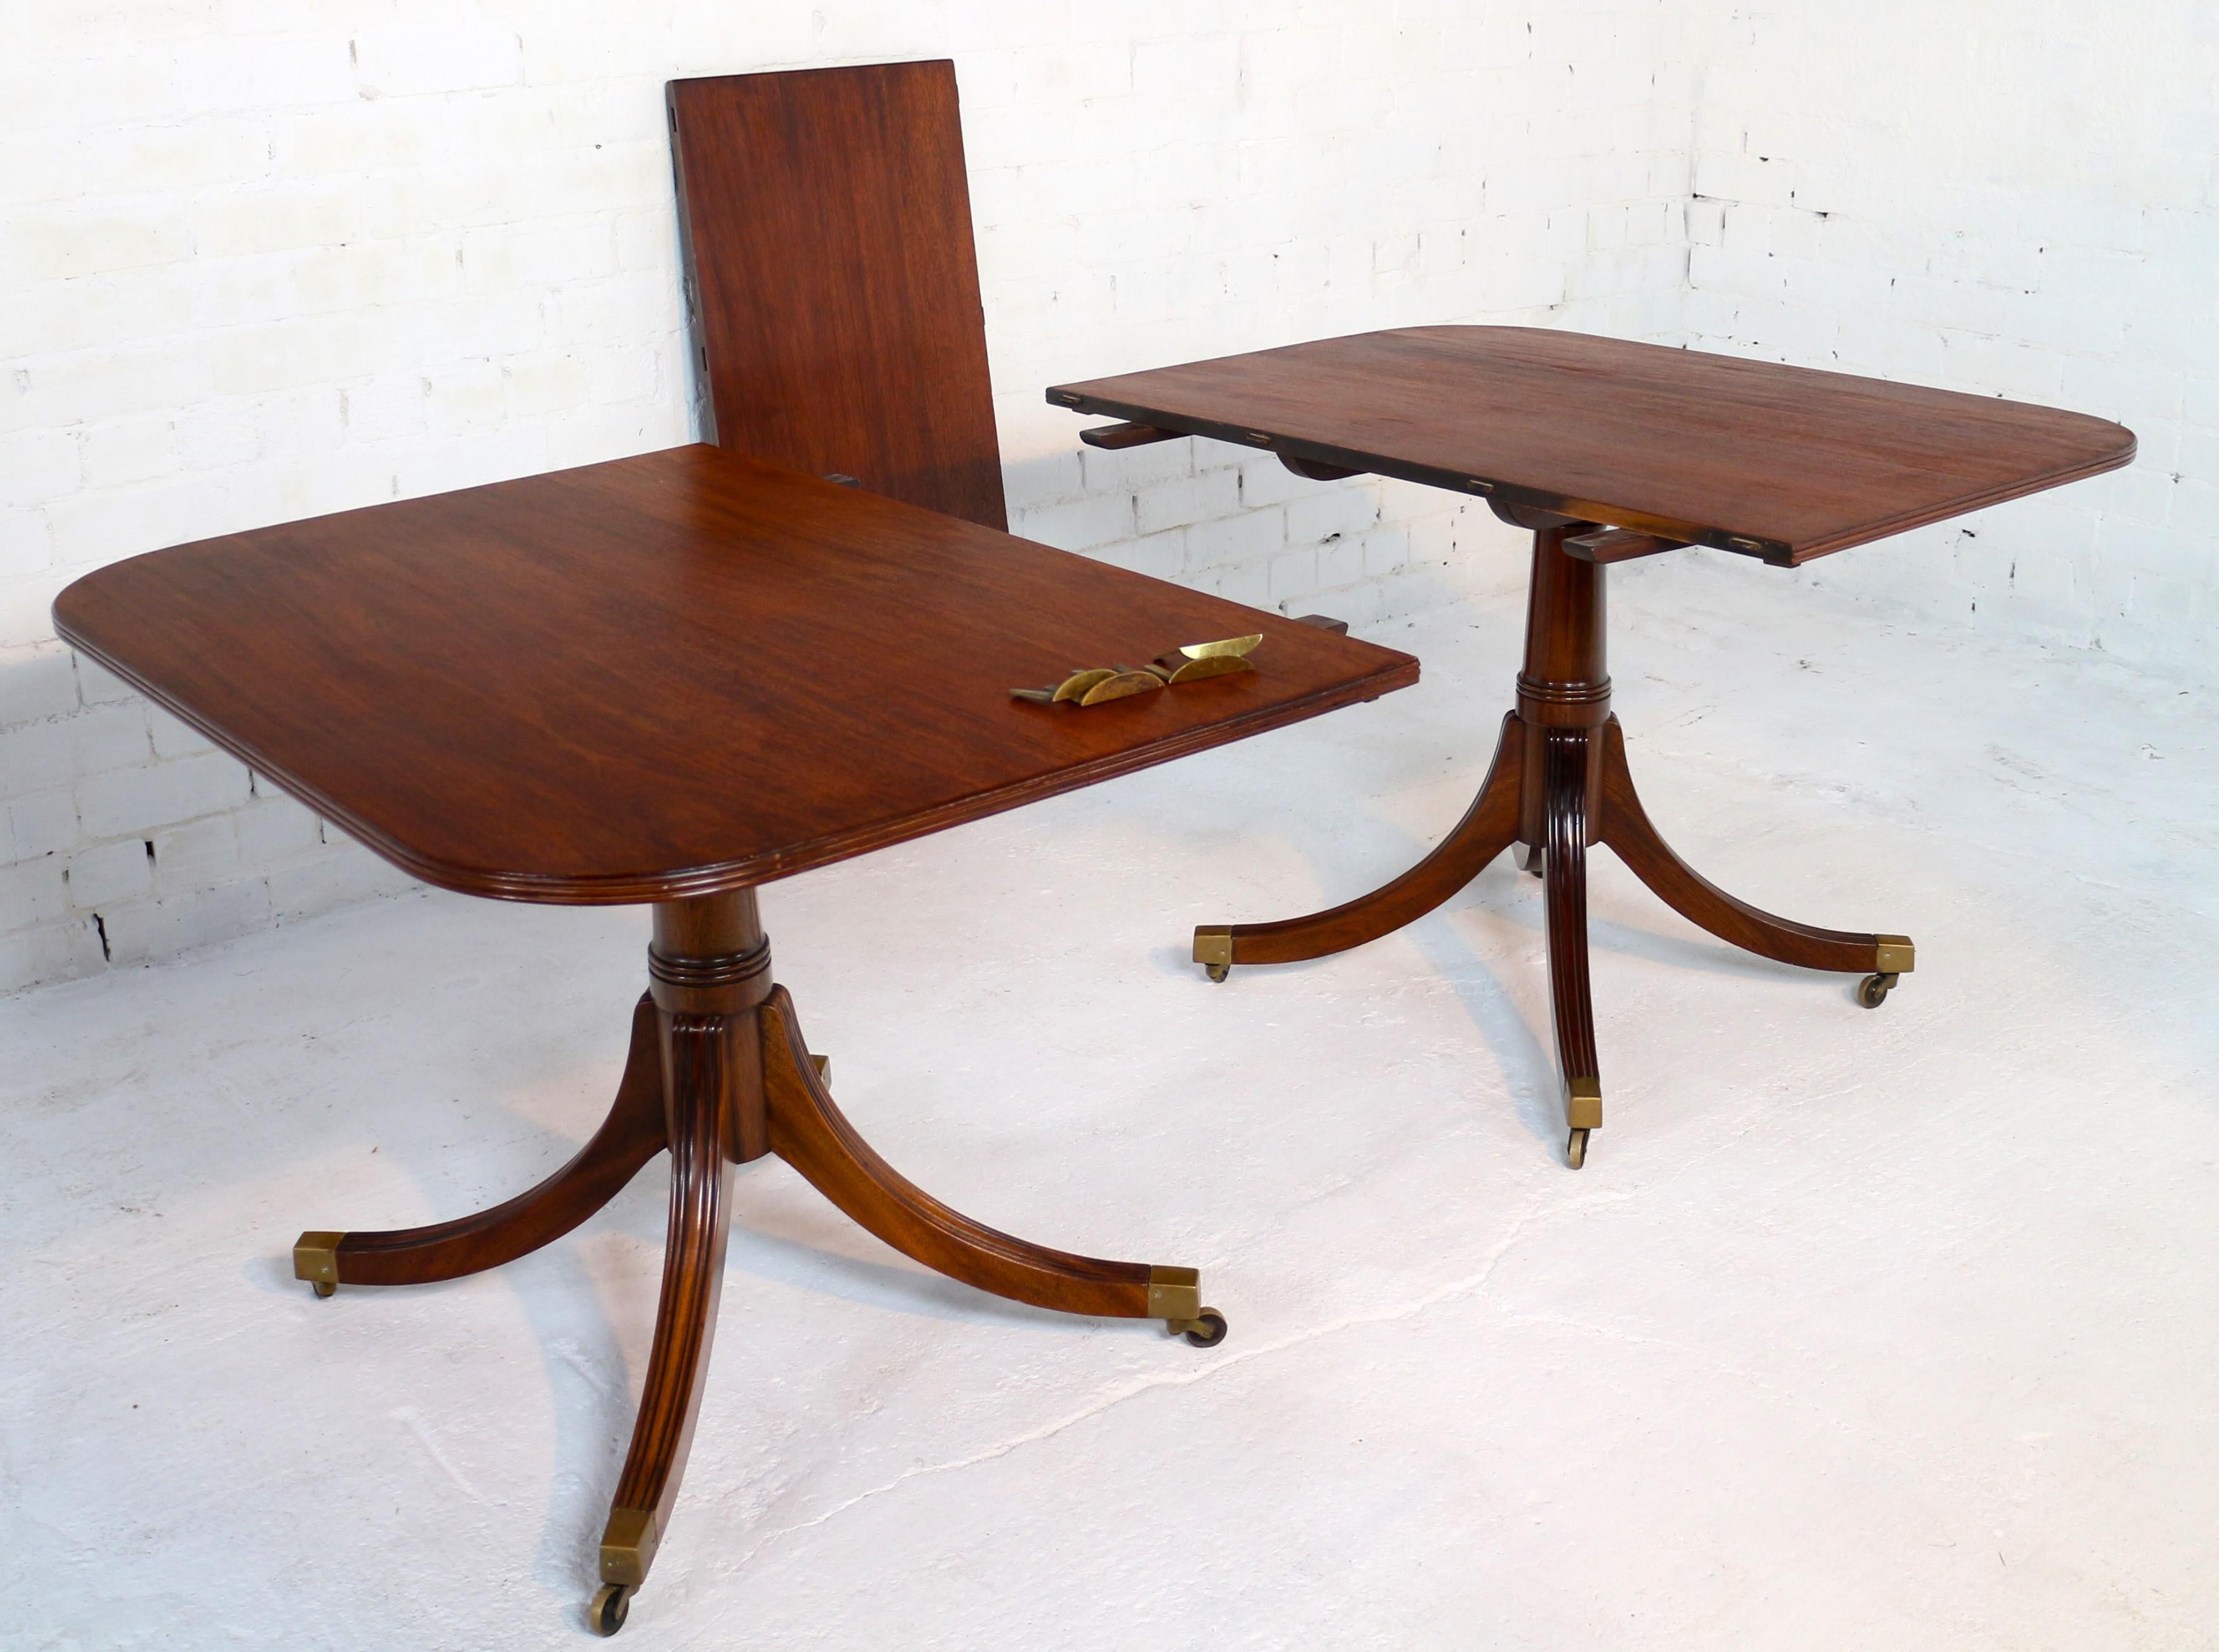 Regency Style Solid Mahogany Twin Pillar Dining Table/Pair Side Tables, Seats 8 4